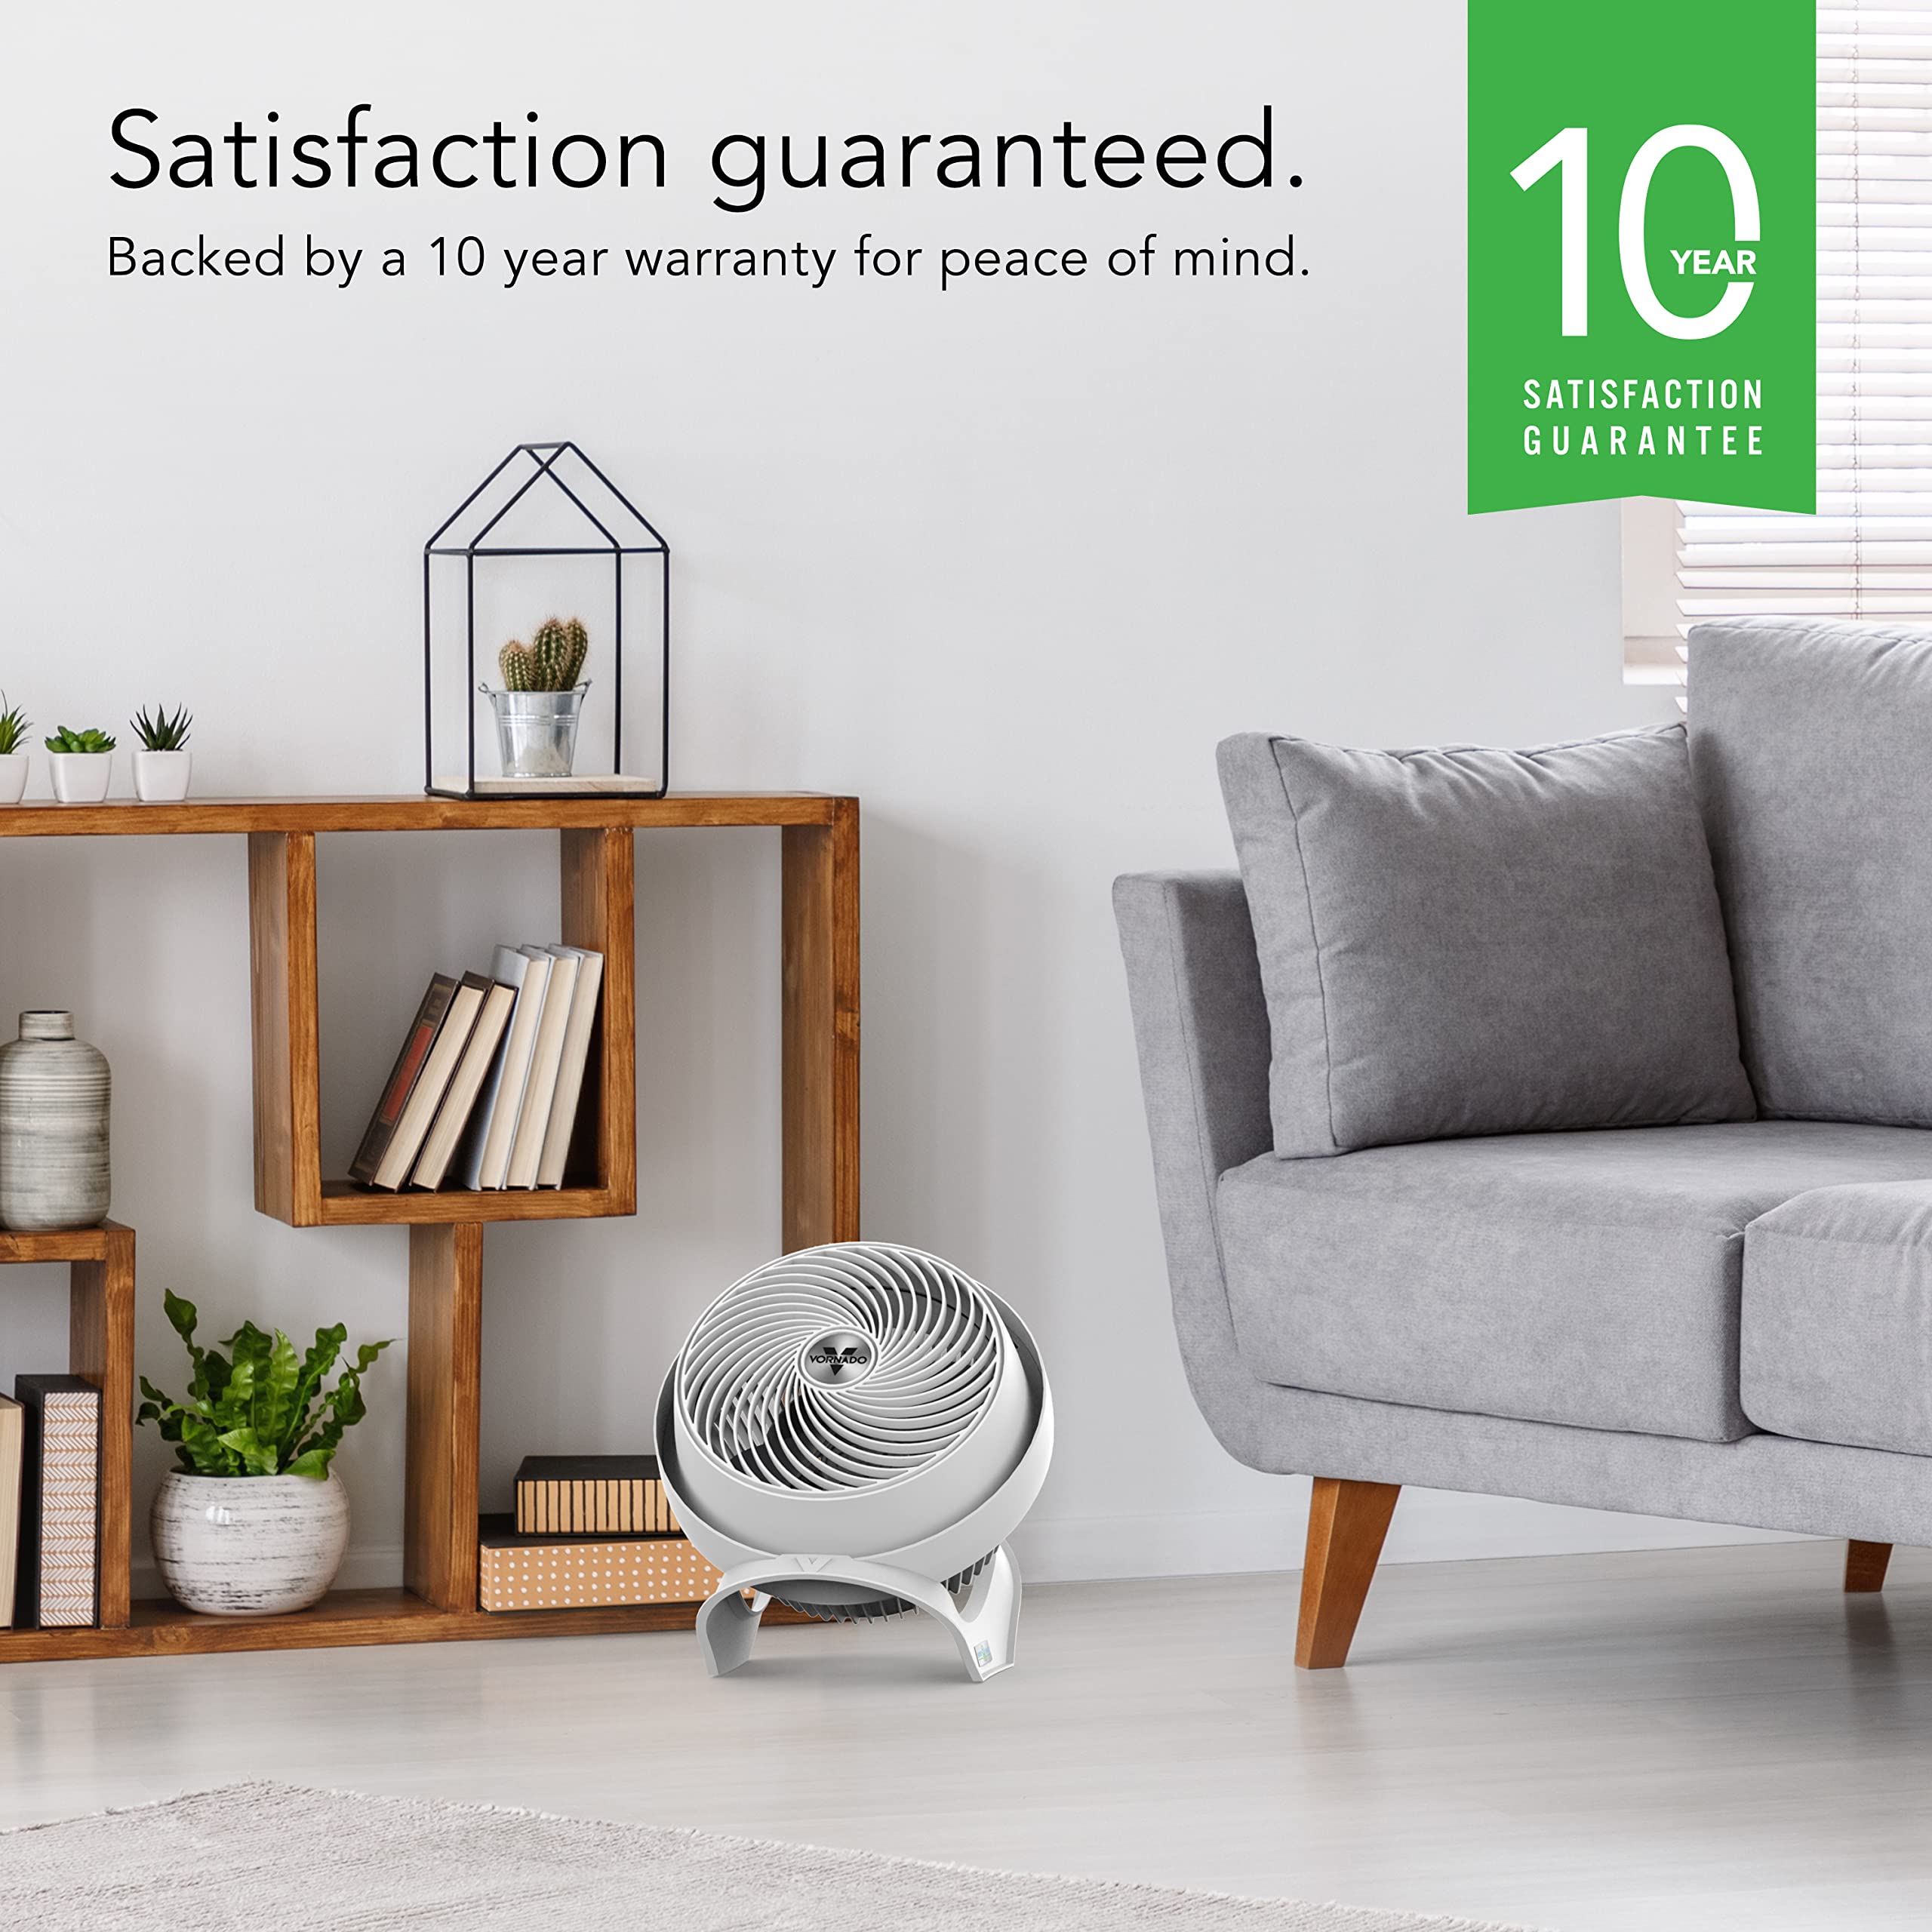 Vornado 733DC Whole Room Energy Smart Air Circulator Fan, Made in USA, Variable Speed Control, White, Large